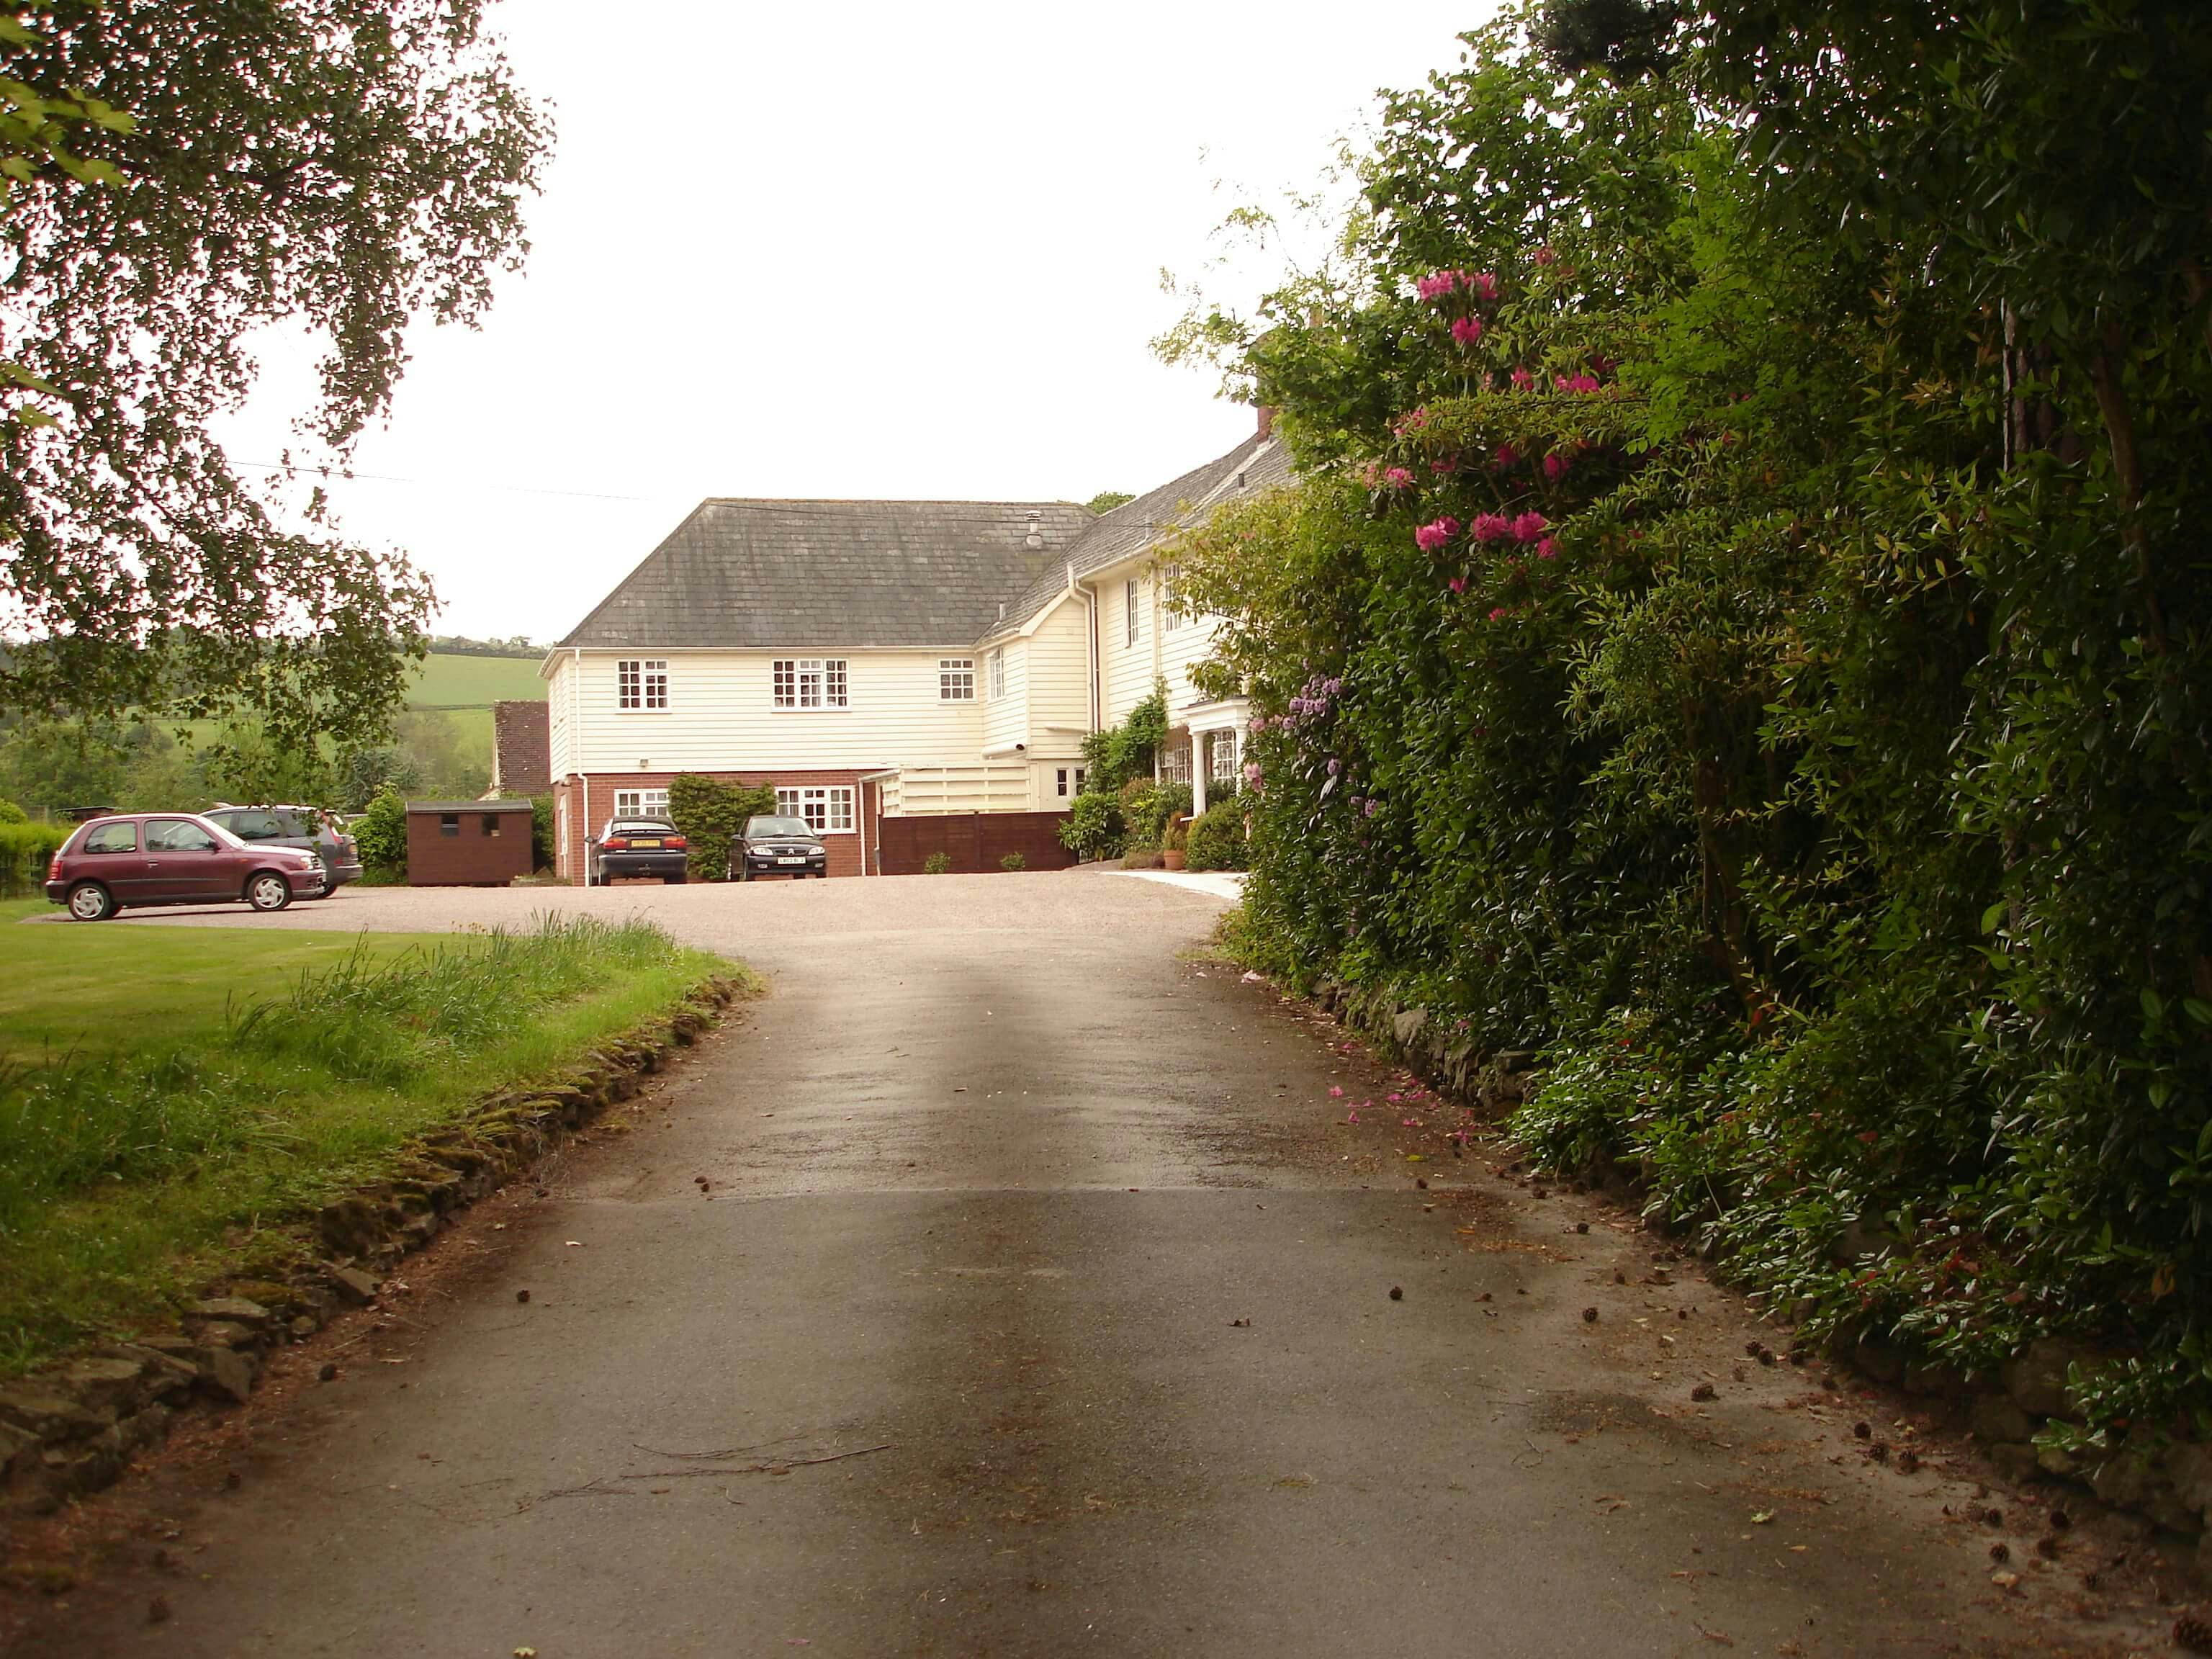 Exterior of Evendine House care home in Colwall, Malvern